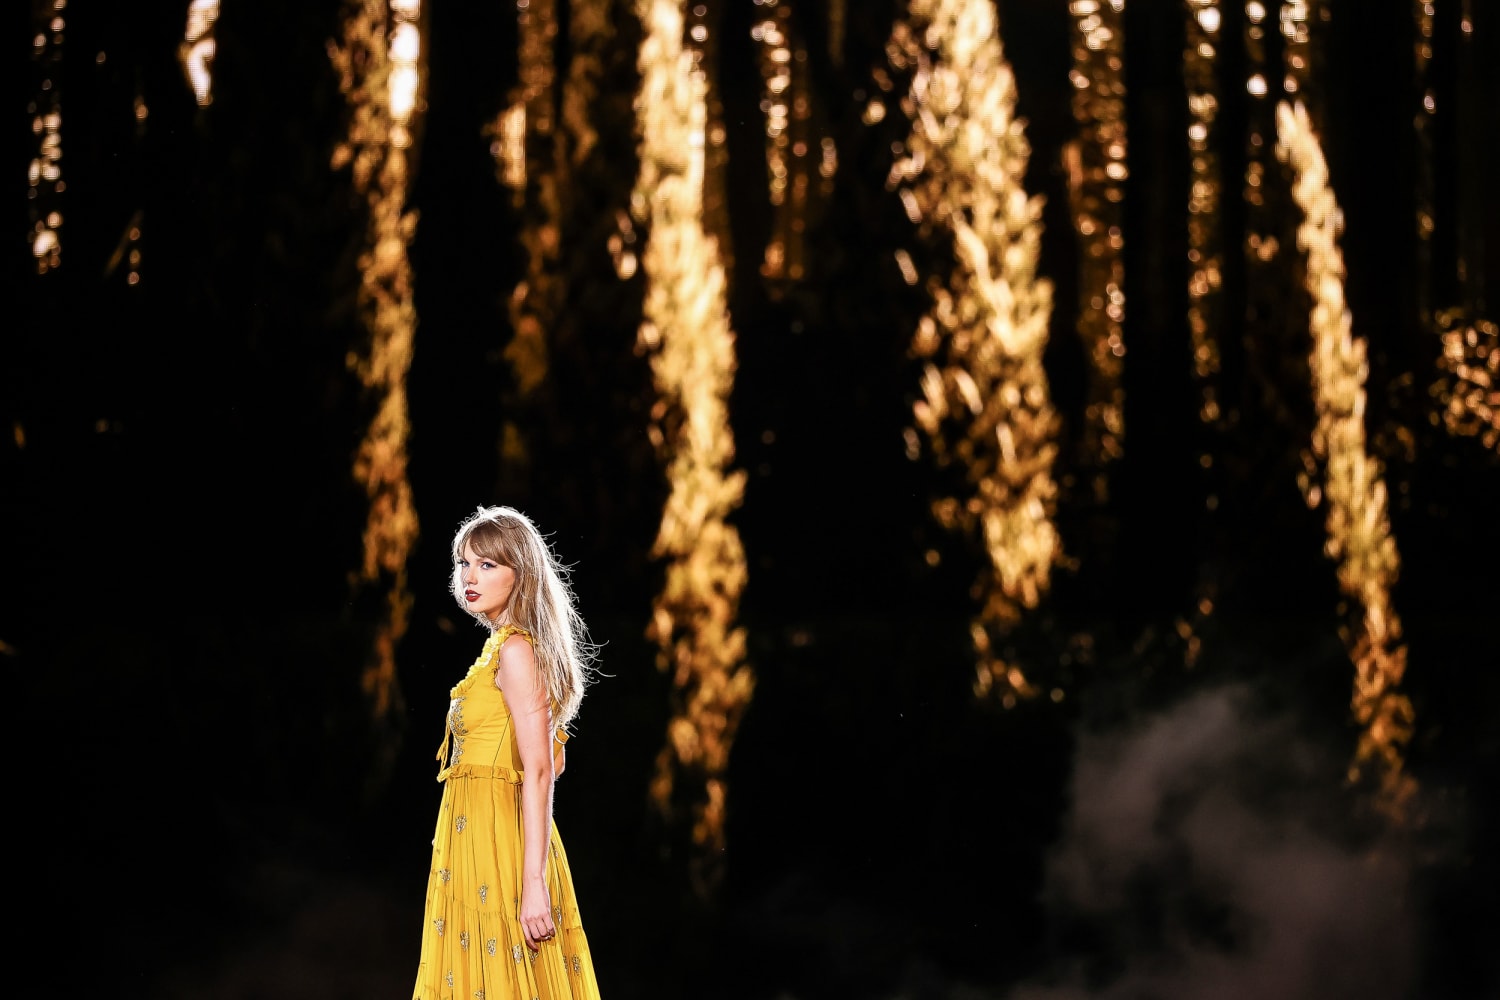 Taylor Swift's Eras Tour Concert Film: Everything We Know So Far